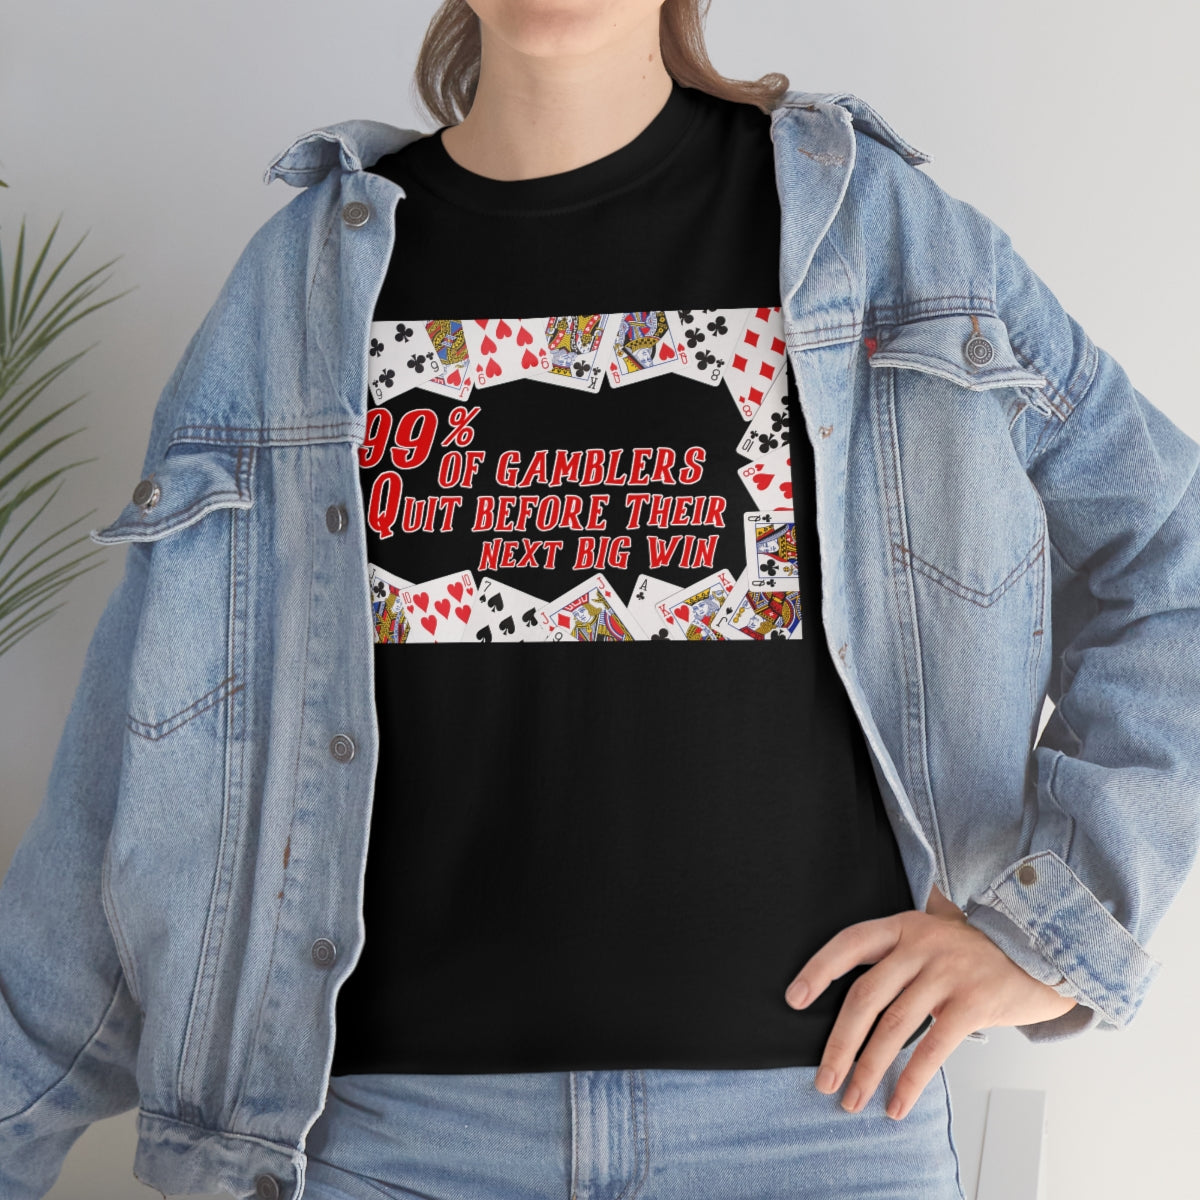 ninety-nine percent of Gamblers Quit before their next big win - Unisex Heavy Cotton Tee - All Colors